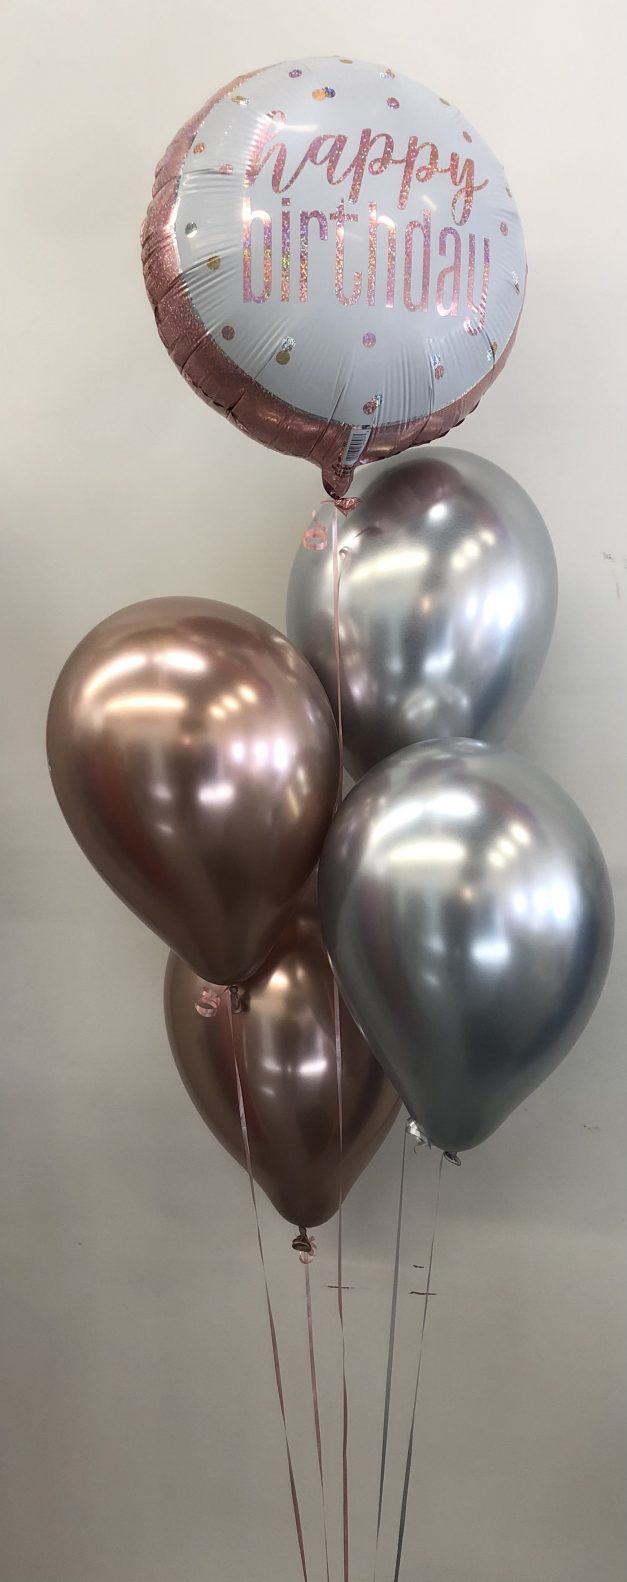 balloon group of 5 chrome rose gold and chrome silver